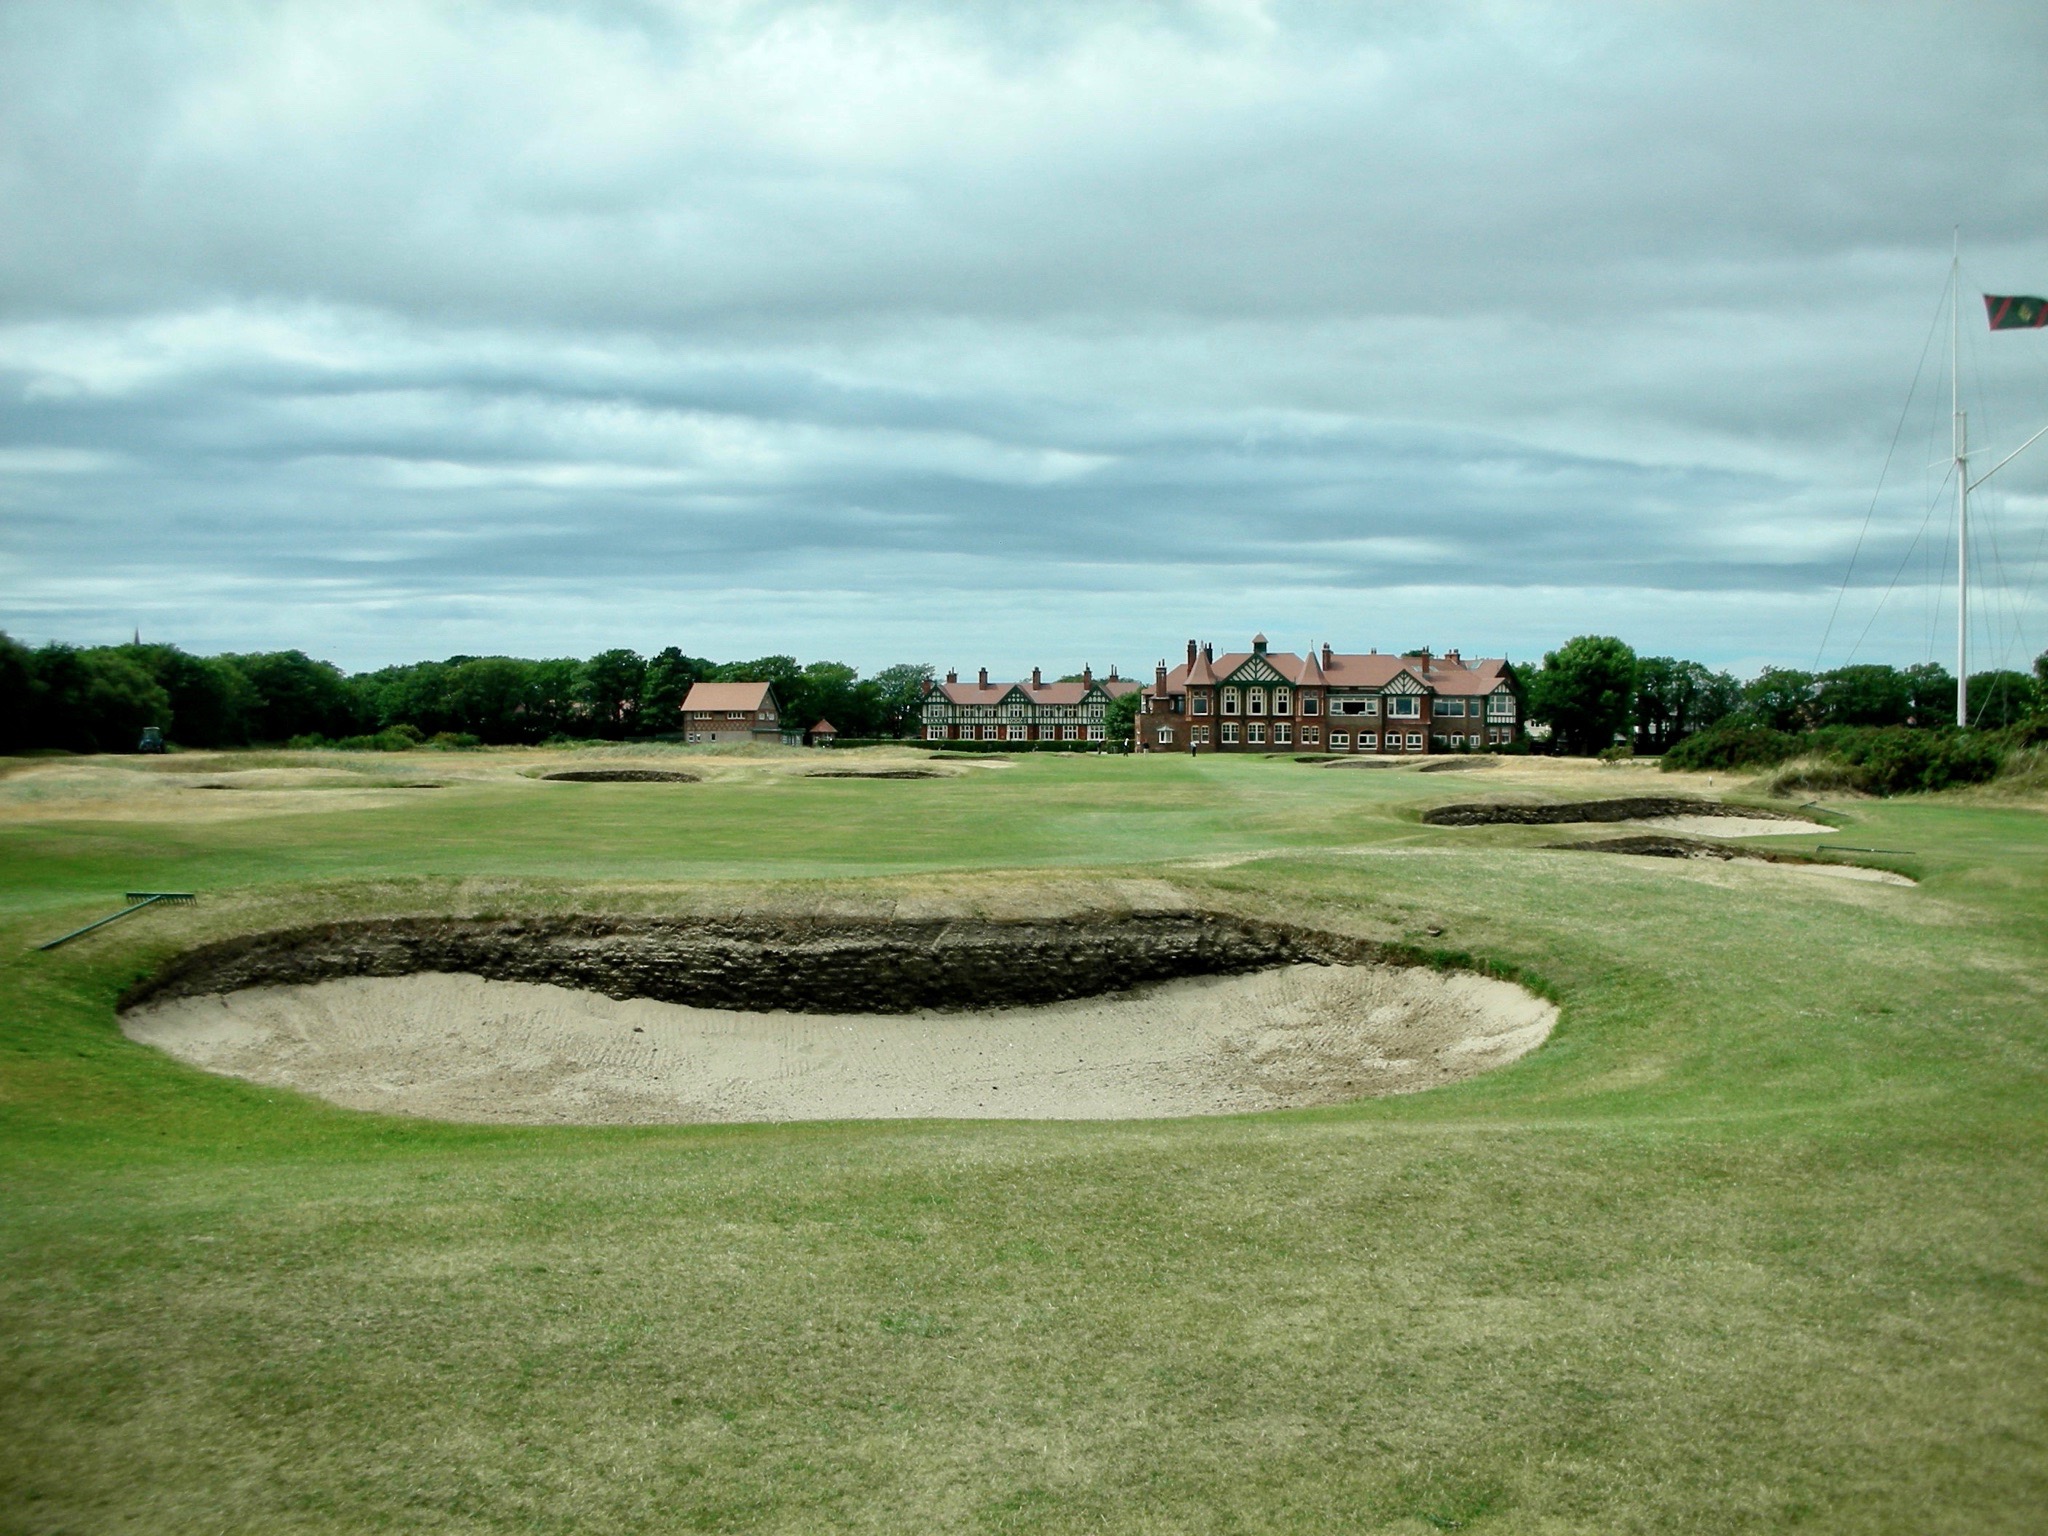 Royal Lytham & St Annes- 18th hole & clubhouse